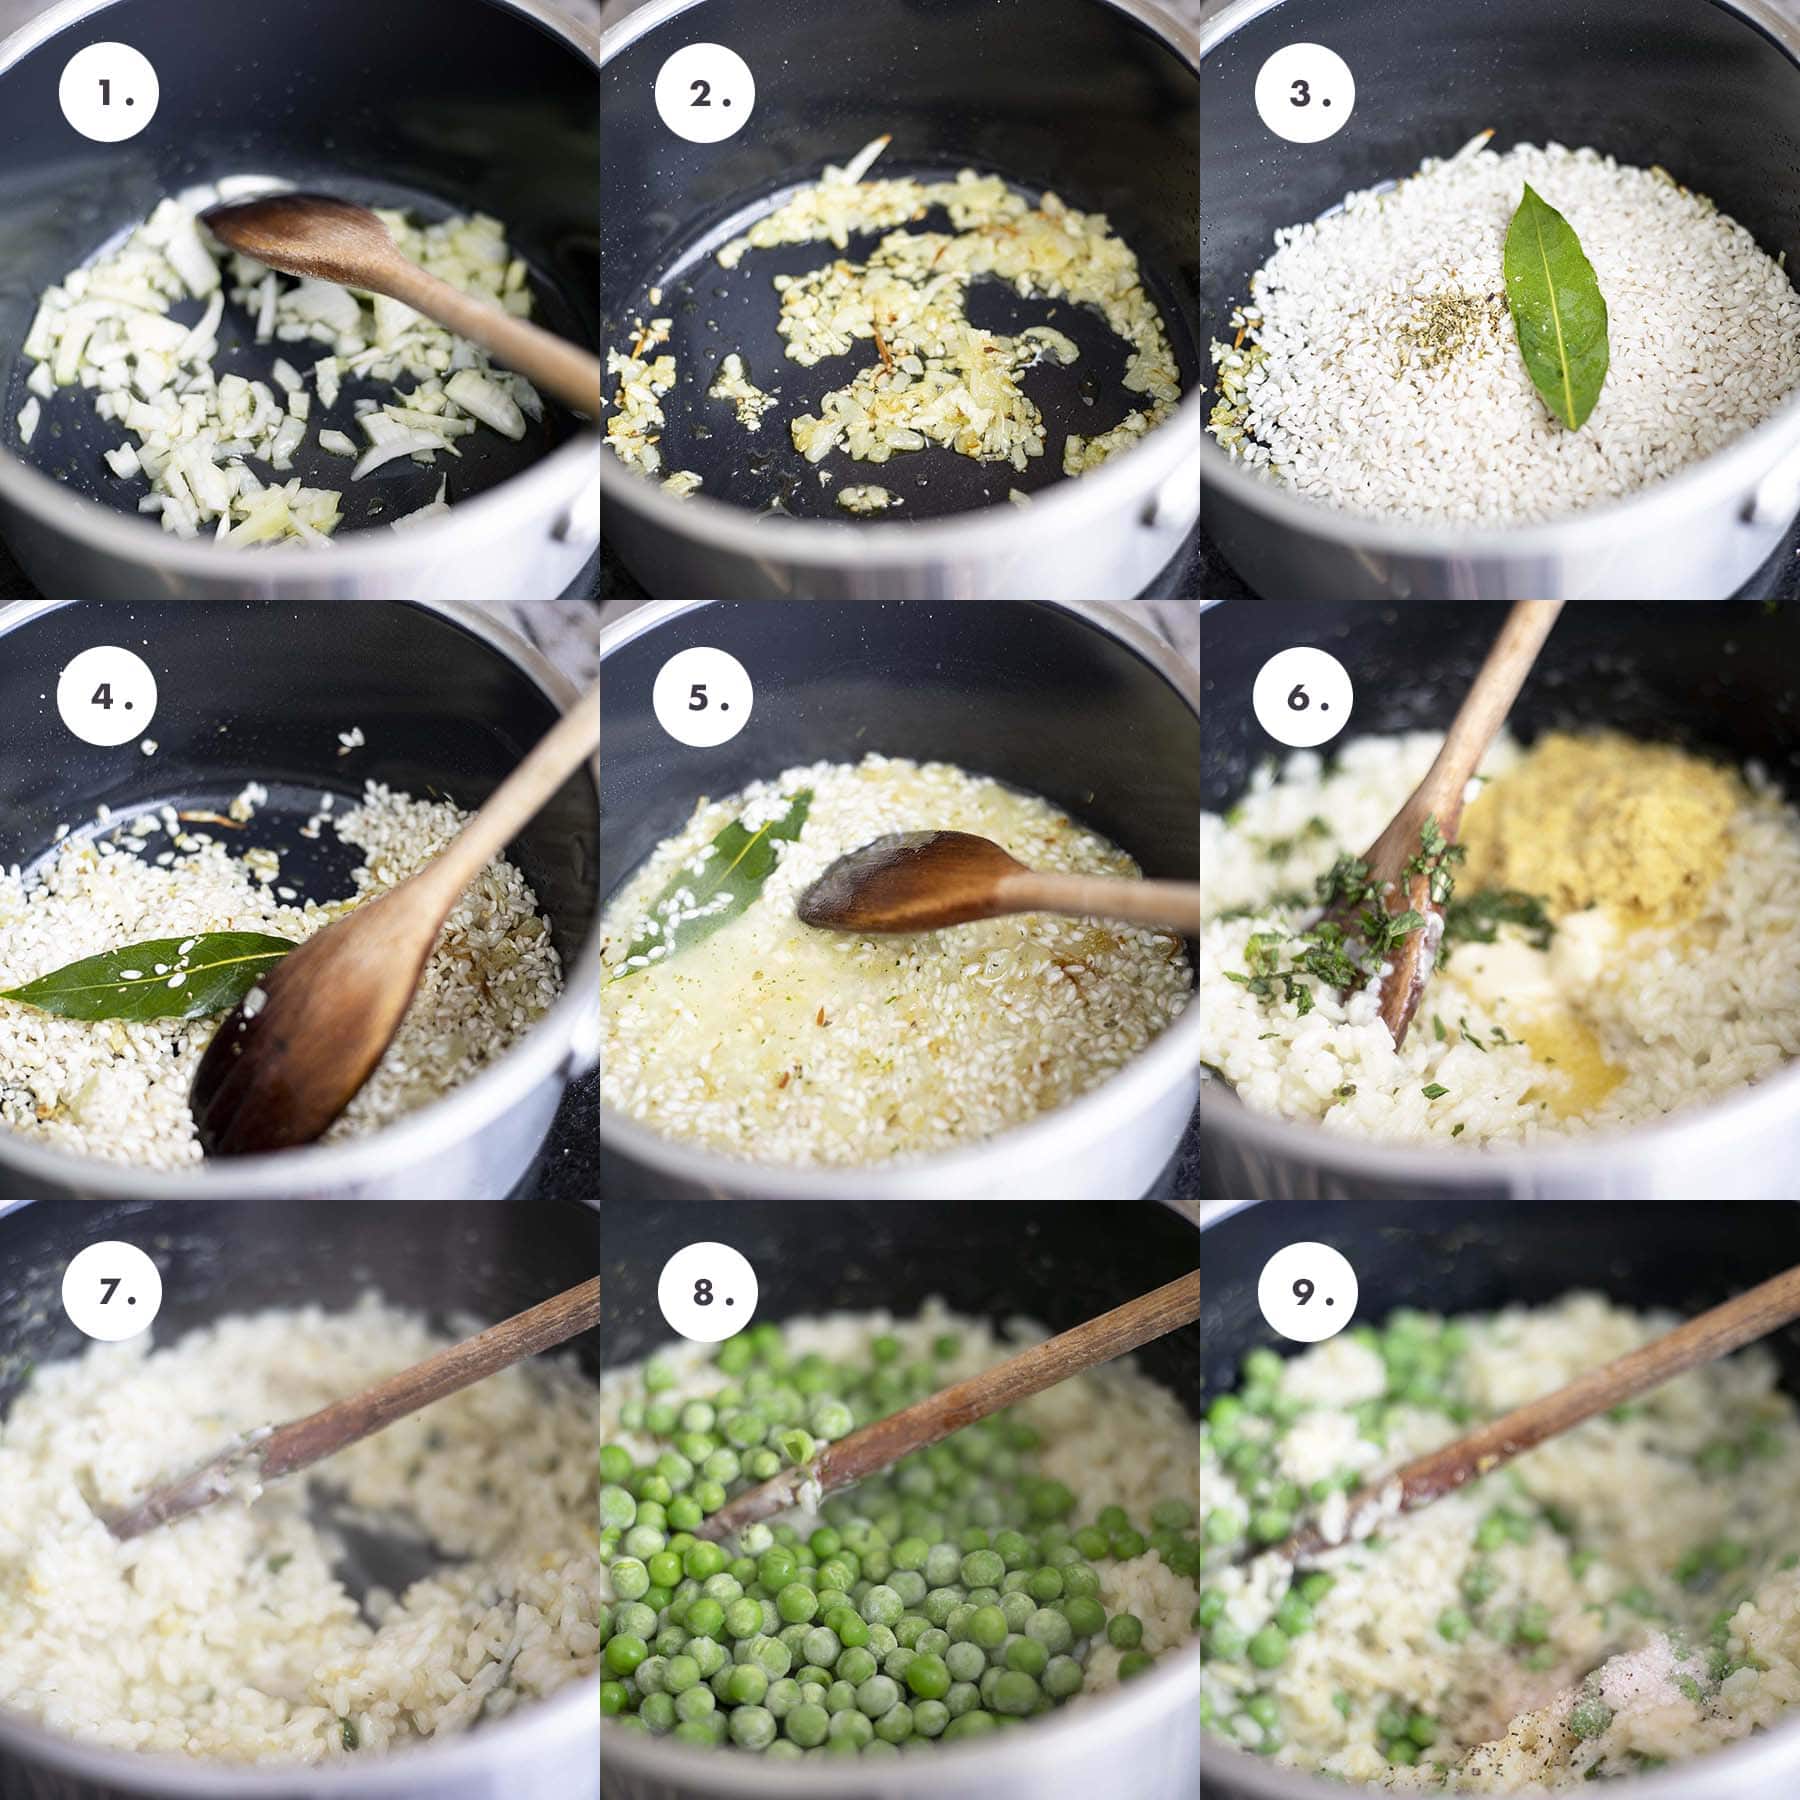 risotto cooking in stages